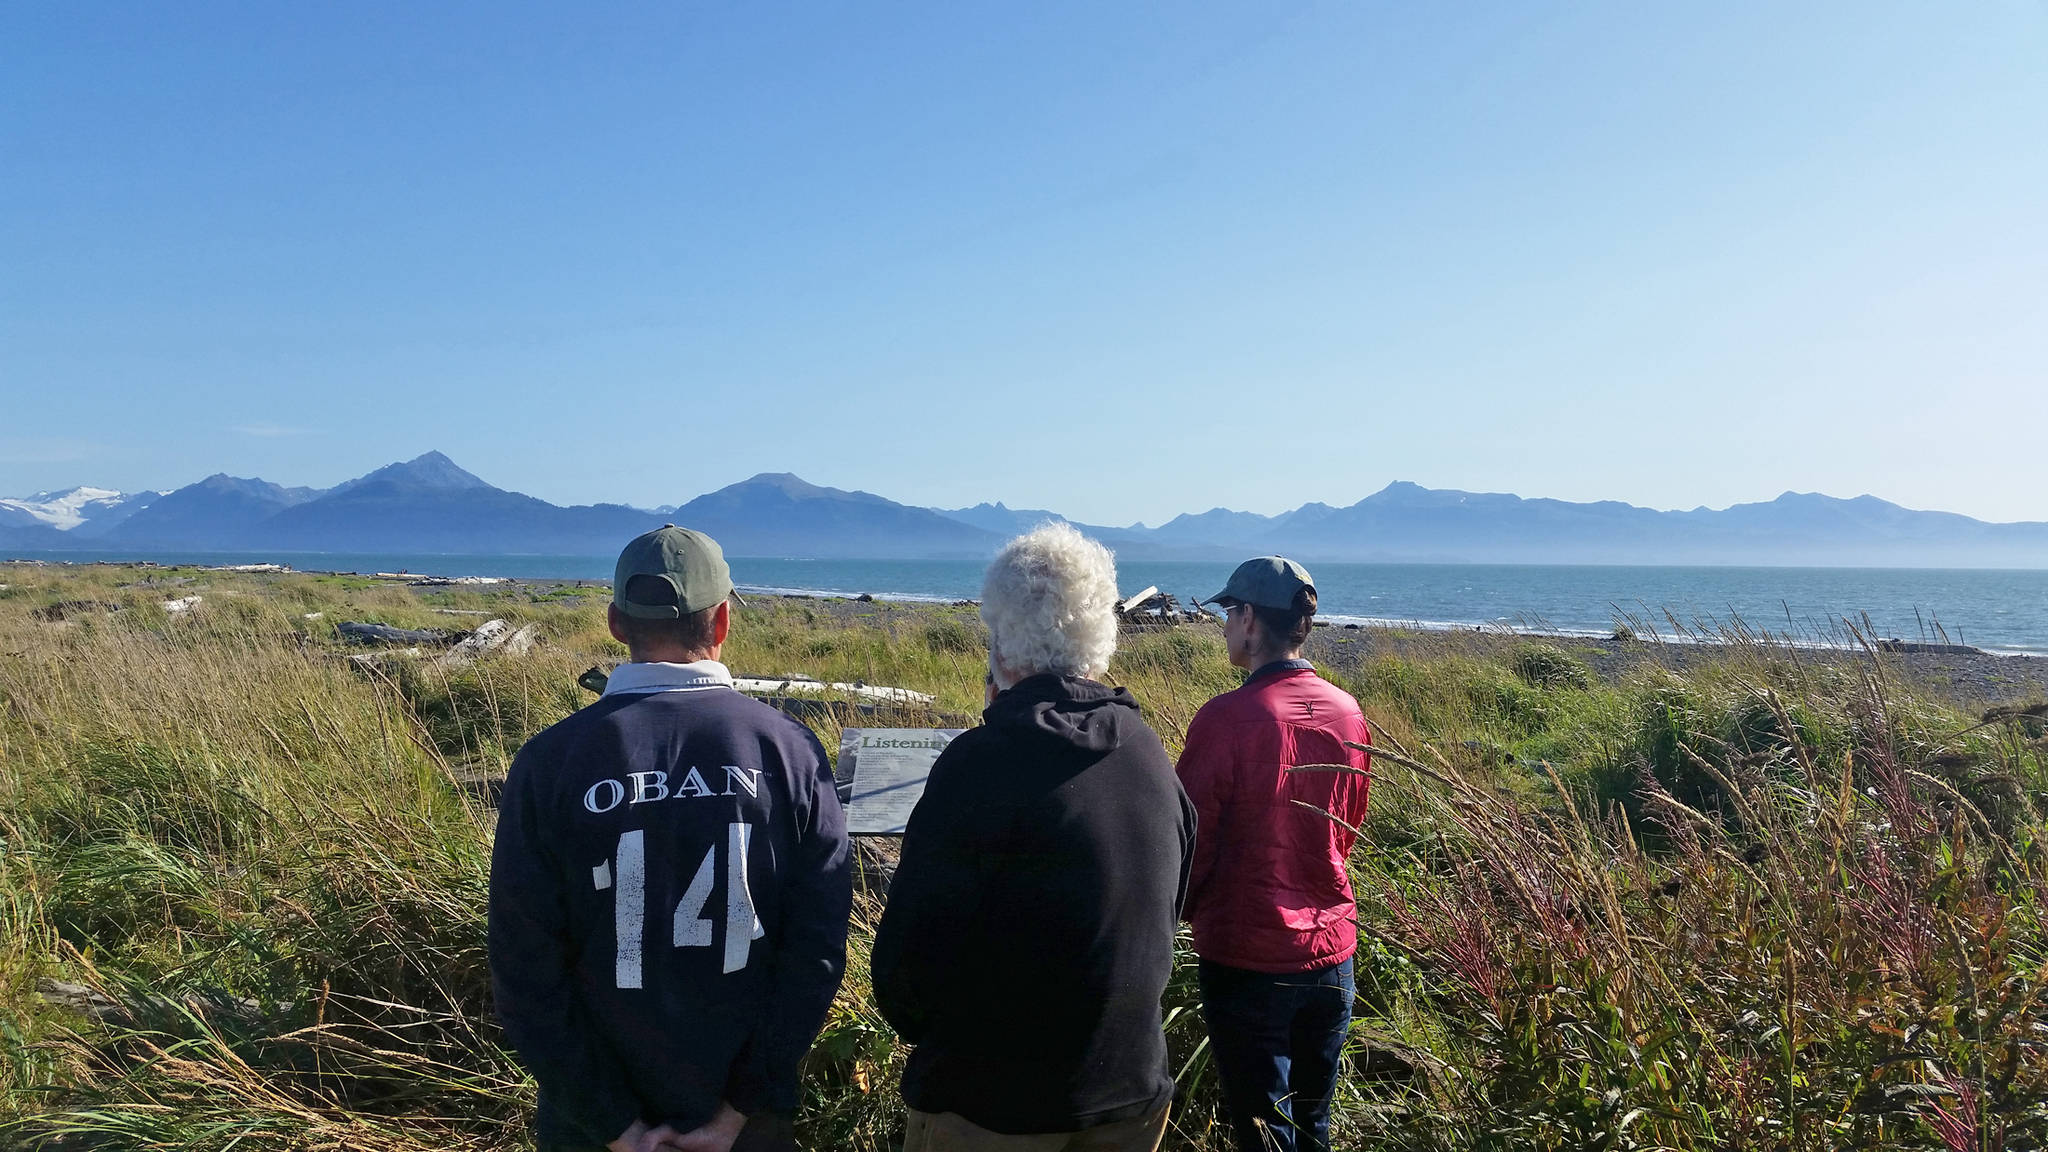 Participants in a pre-performance silent estuary walk contemplate Wendy Erd’s poetry on Sept. 2, 2018 at the Beluga Slough in Homer, Alaska. (Photo by Mira Klein)